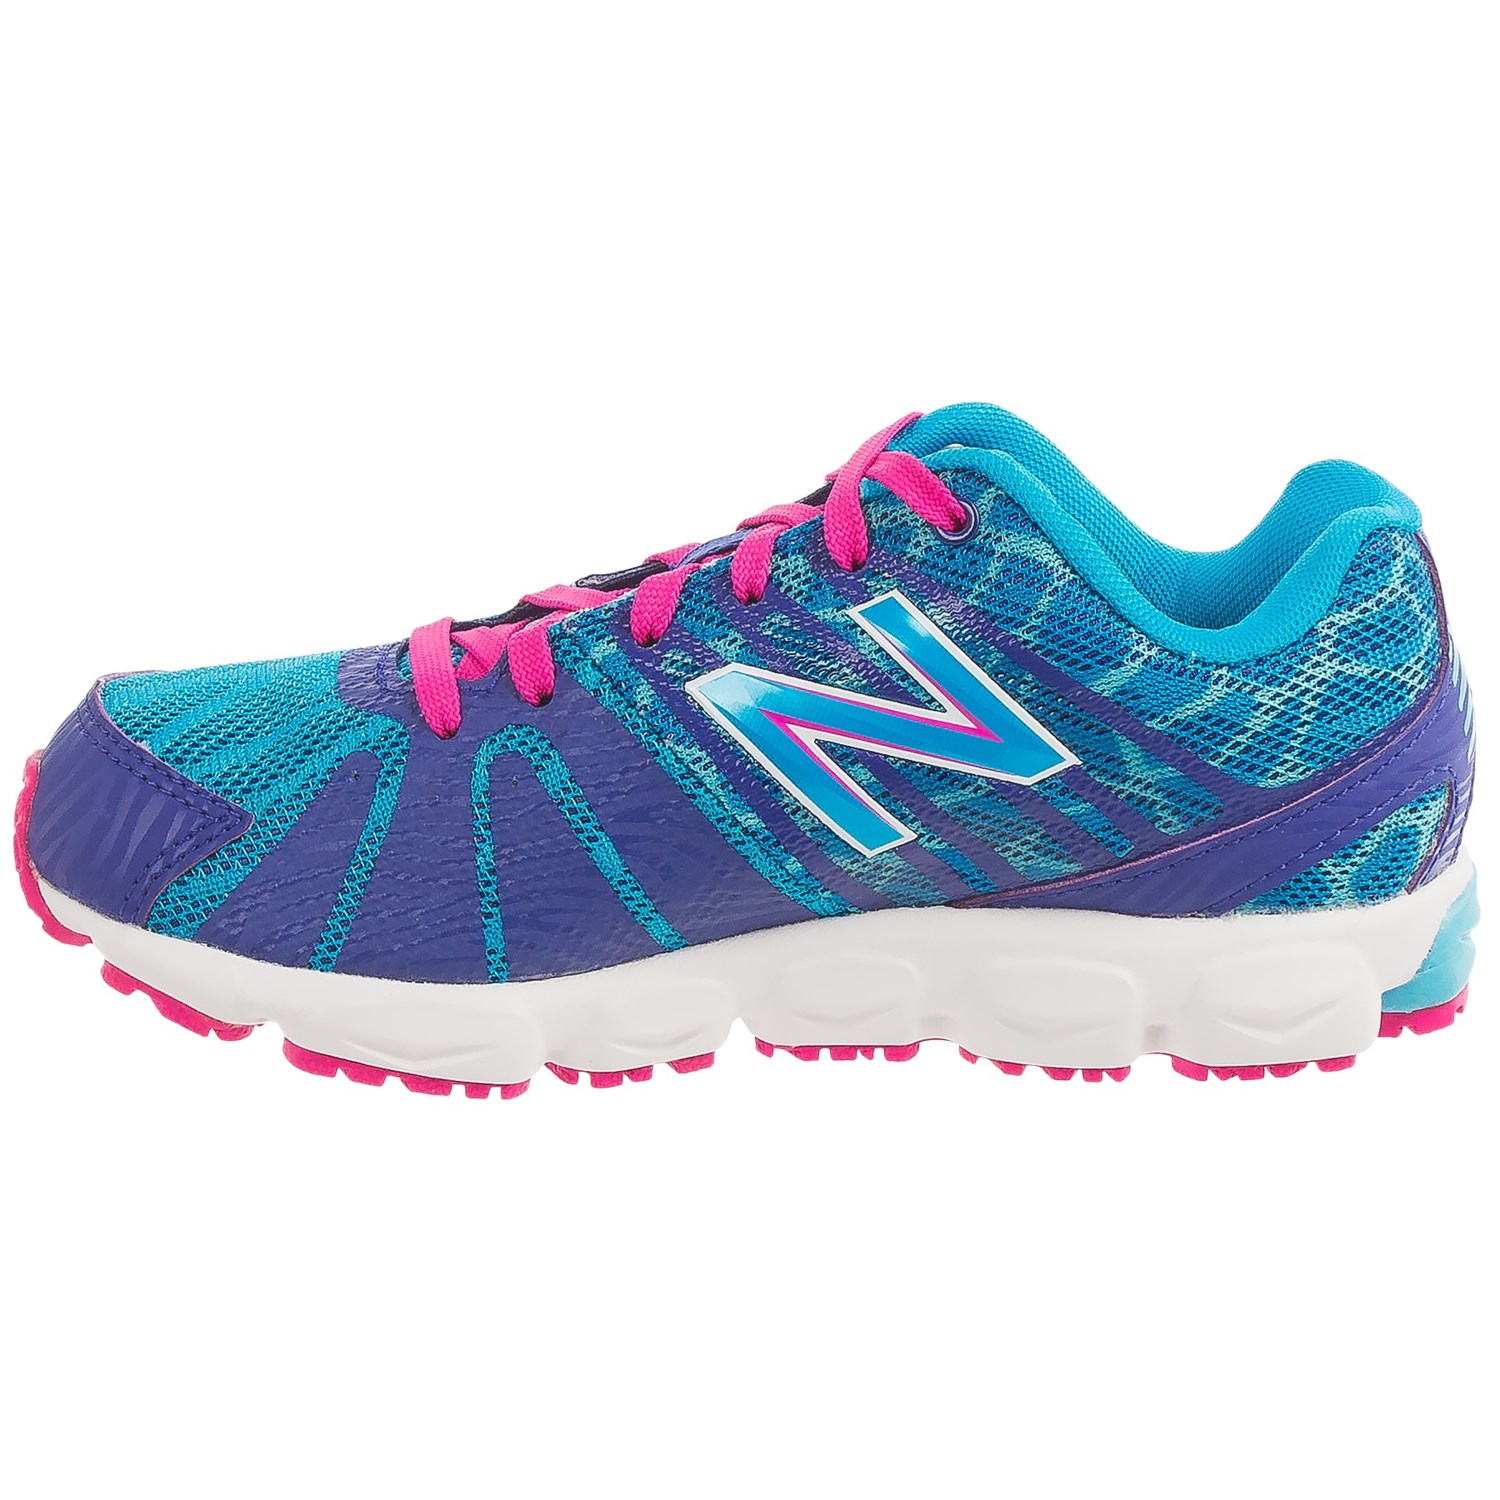 New Balance 890V5 Running Shoes (For Little and Big Girls) - Save 54%